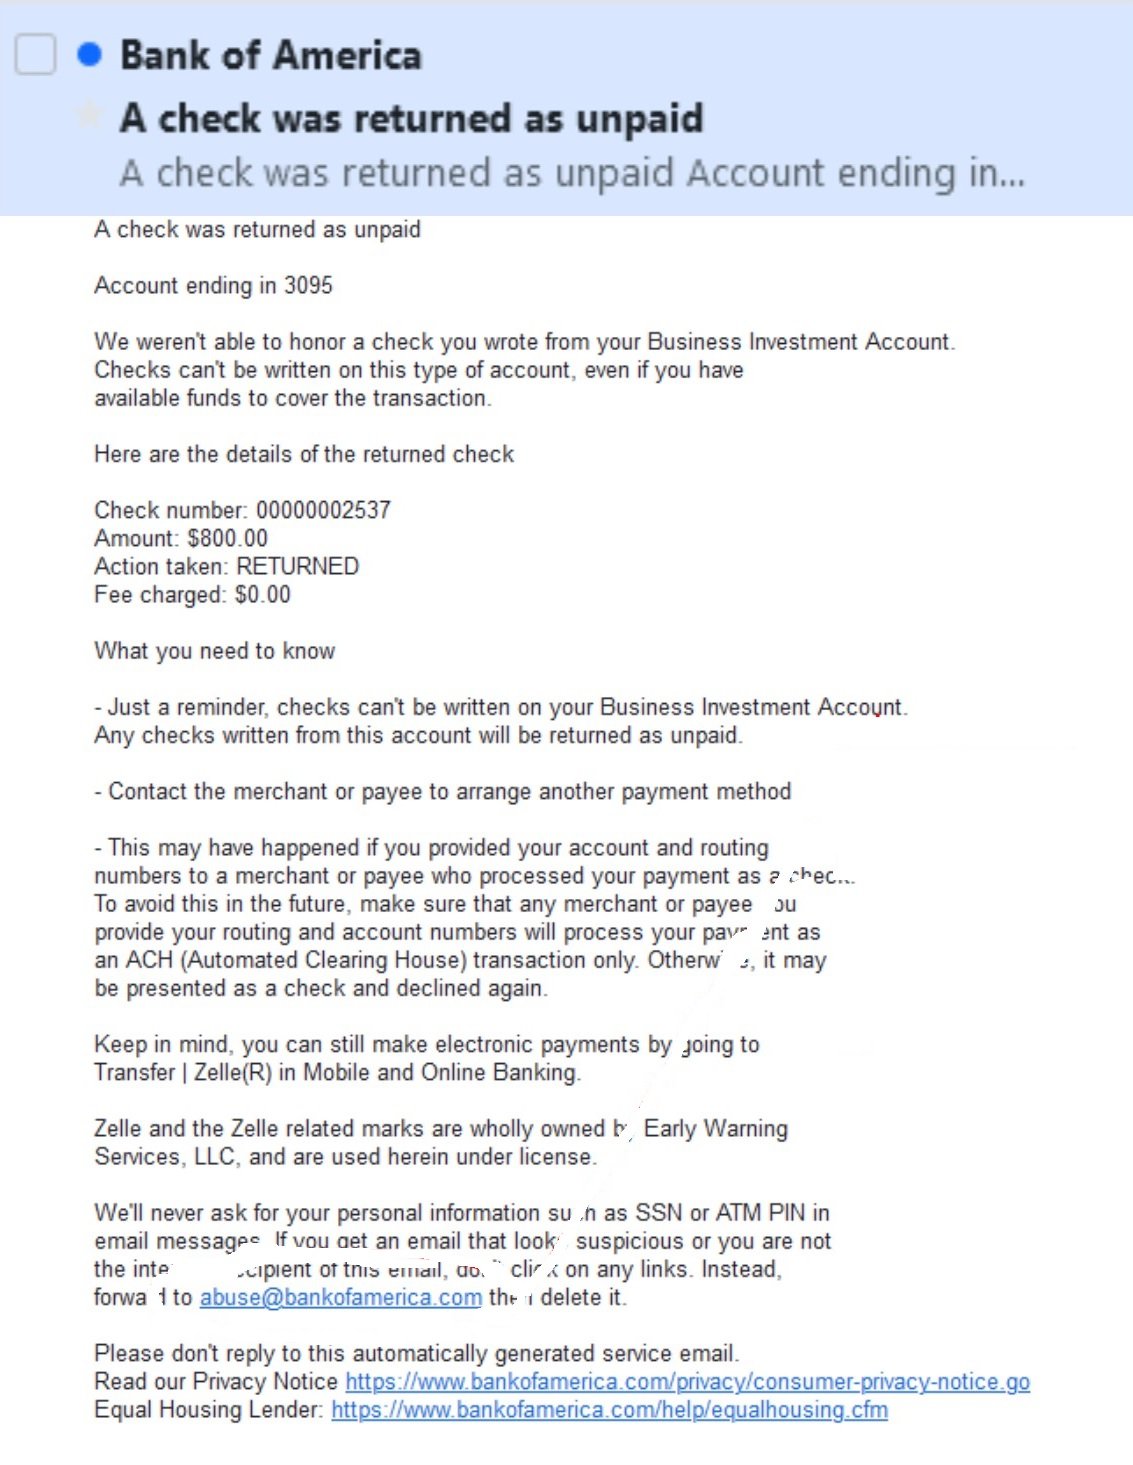 Bank Of America Scam Emails - Check Was Returned as Unpaid